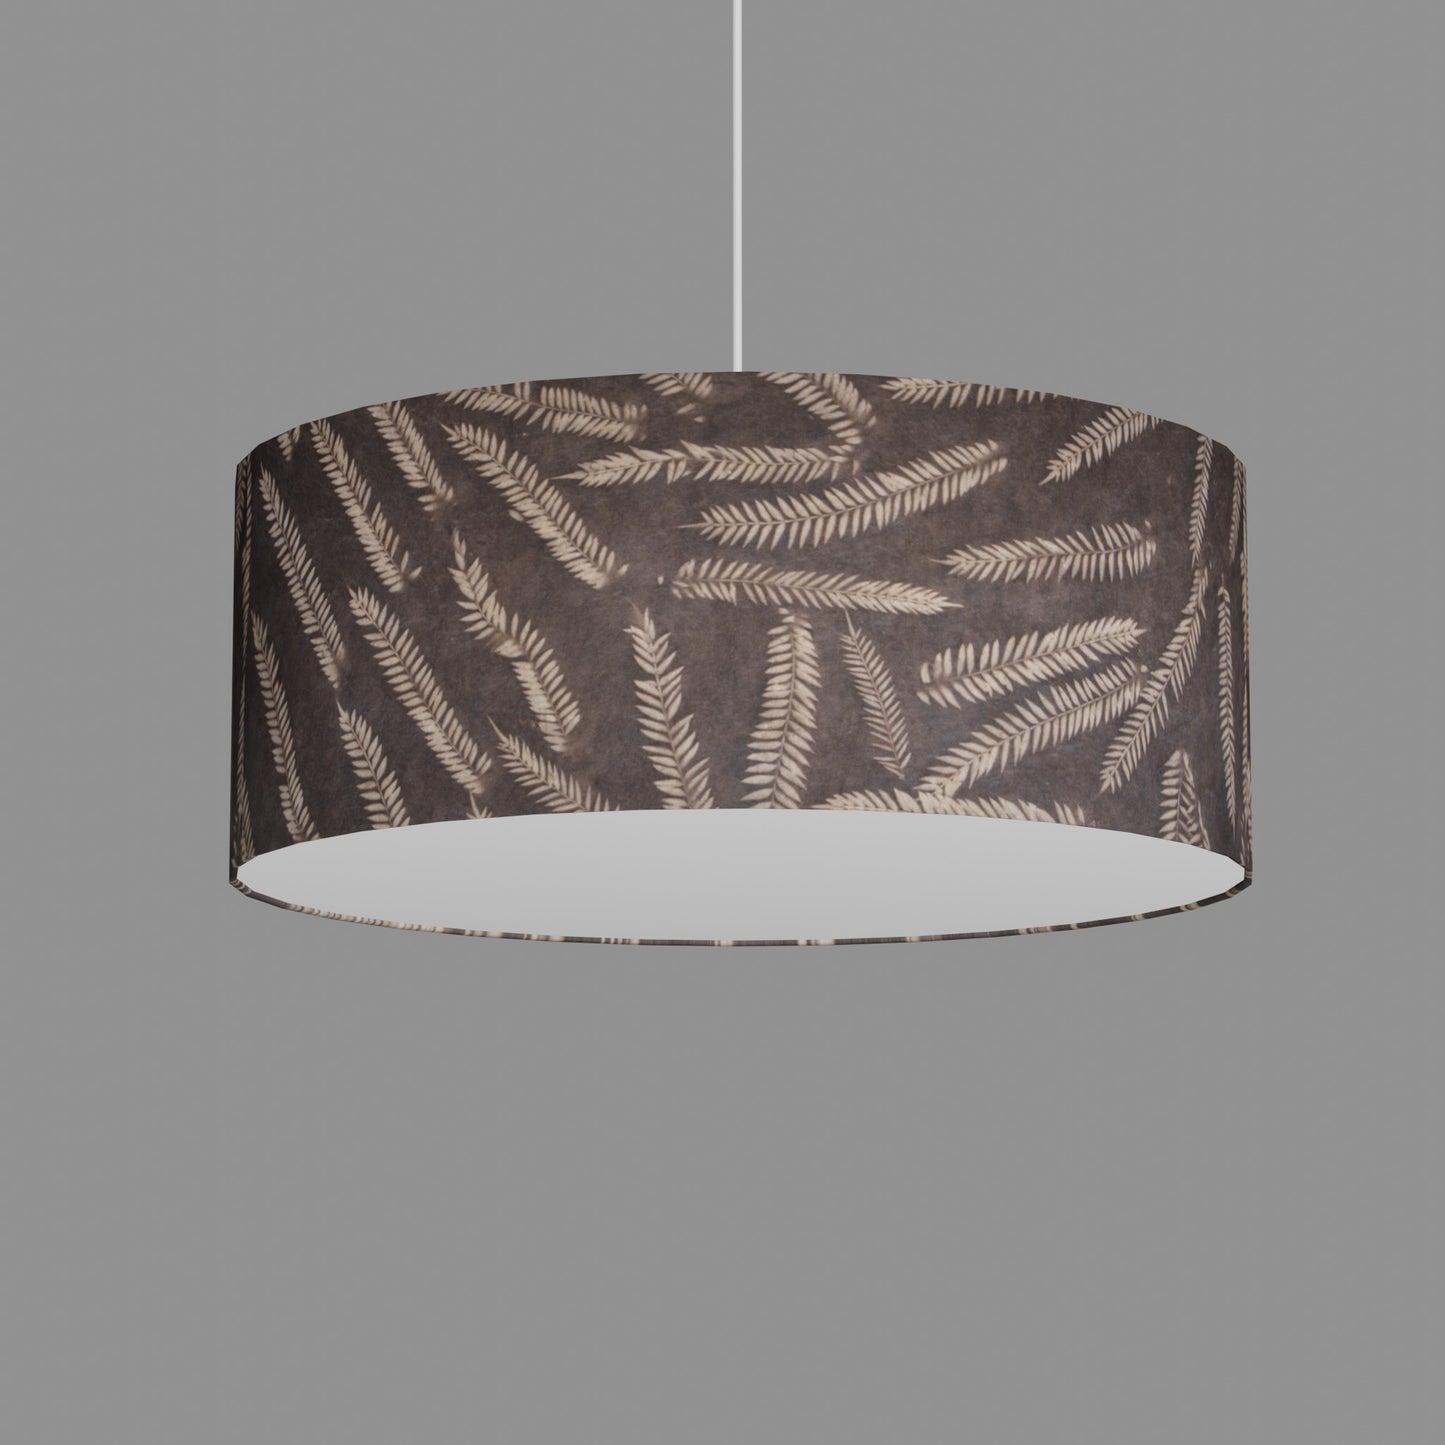 Drum Lamp Shade - P26 - Resistance Dyed Brown Fern, 50cm(d) x 20cm(h)